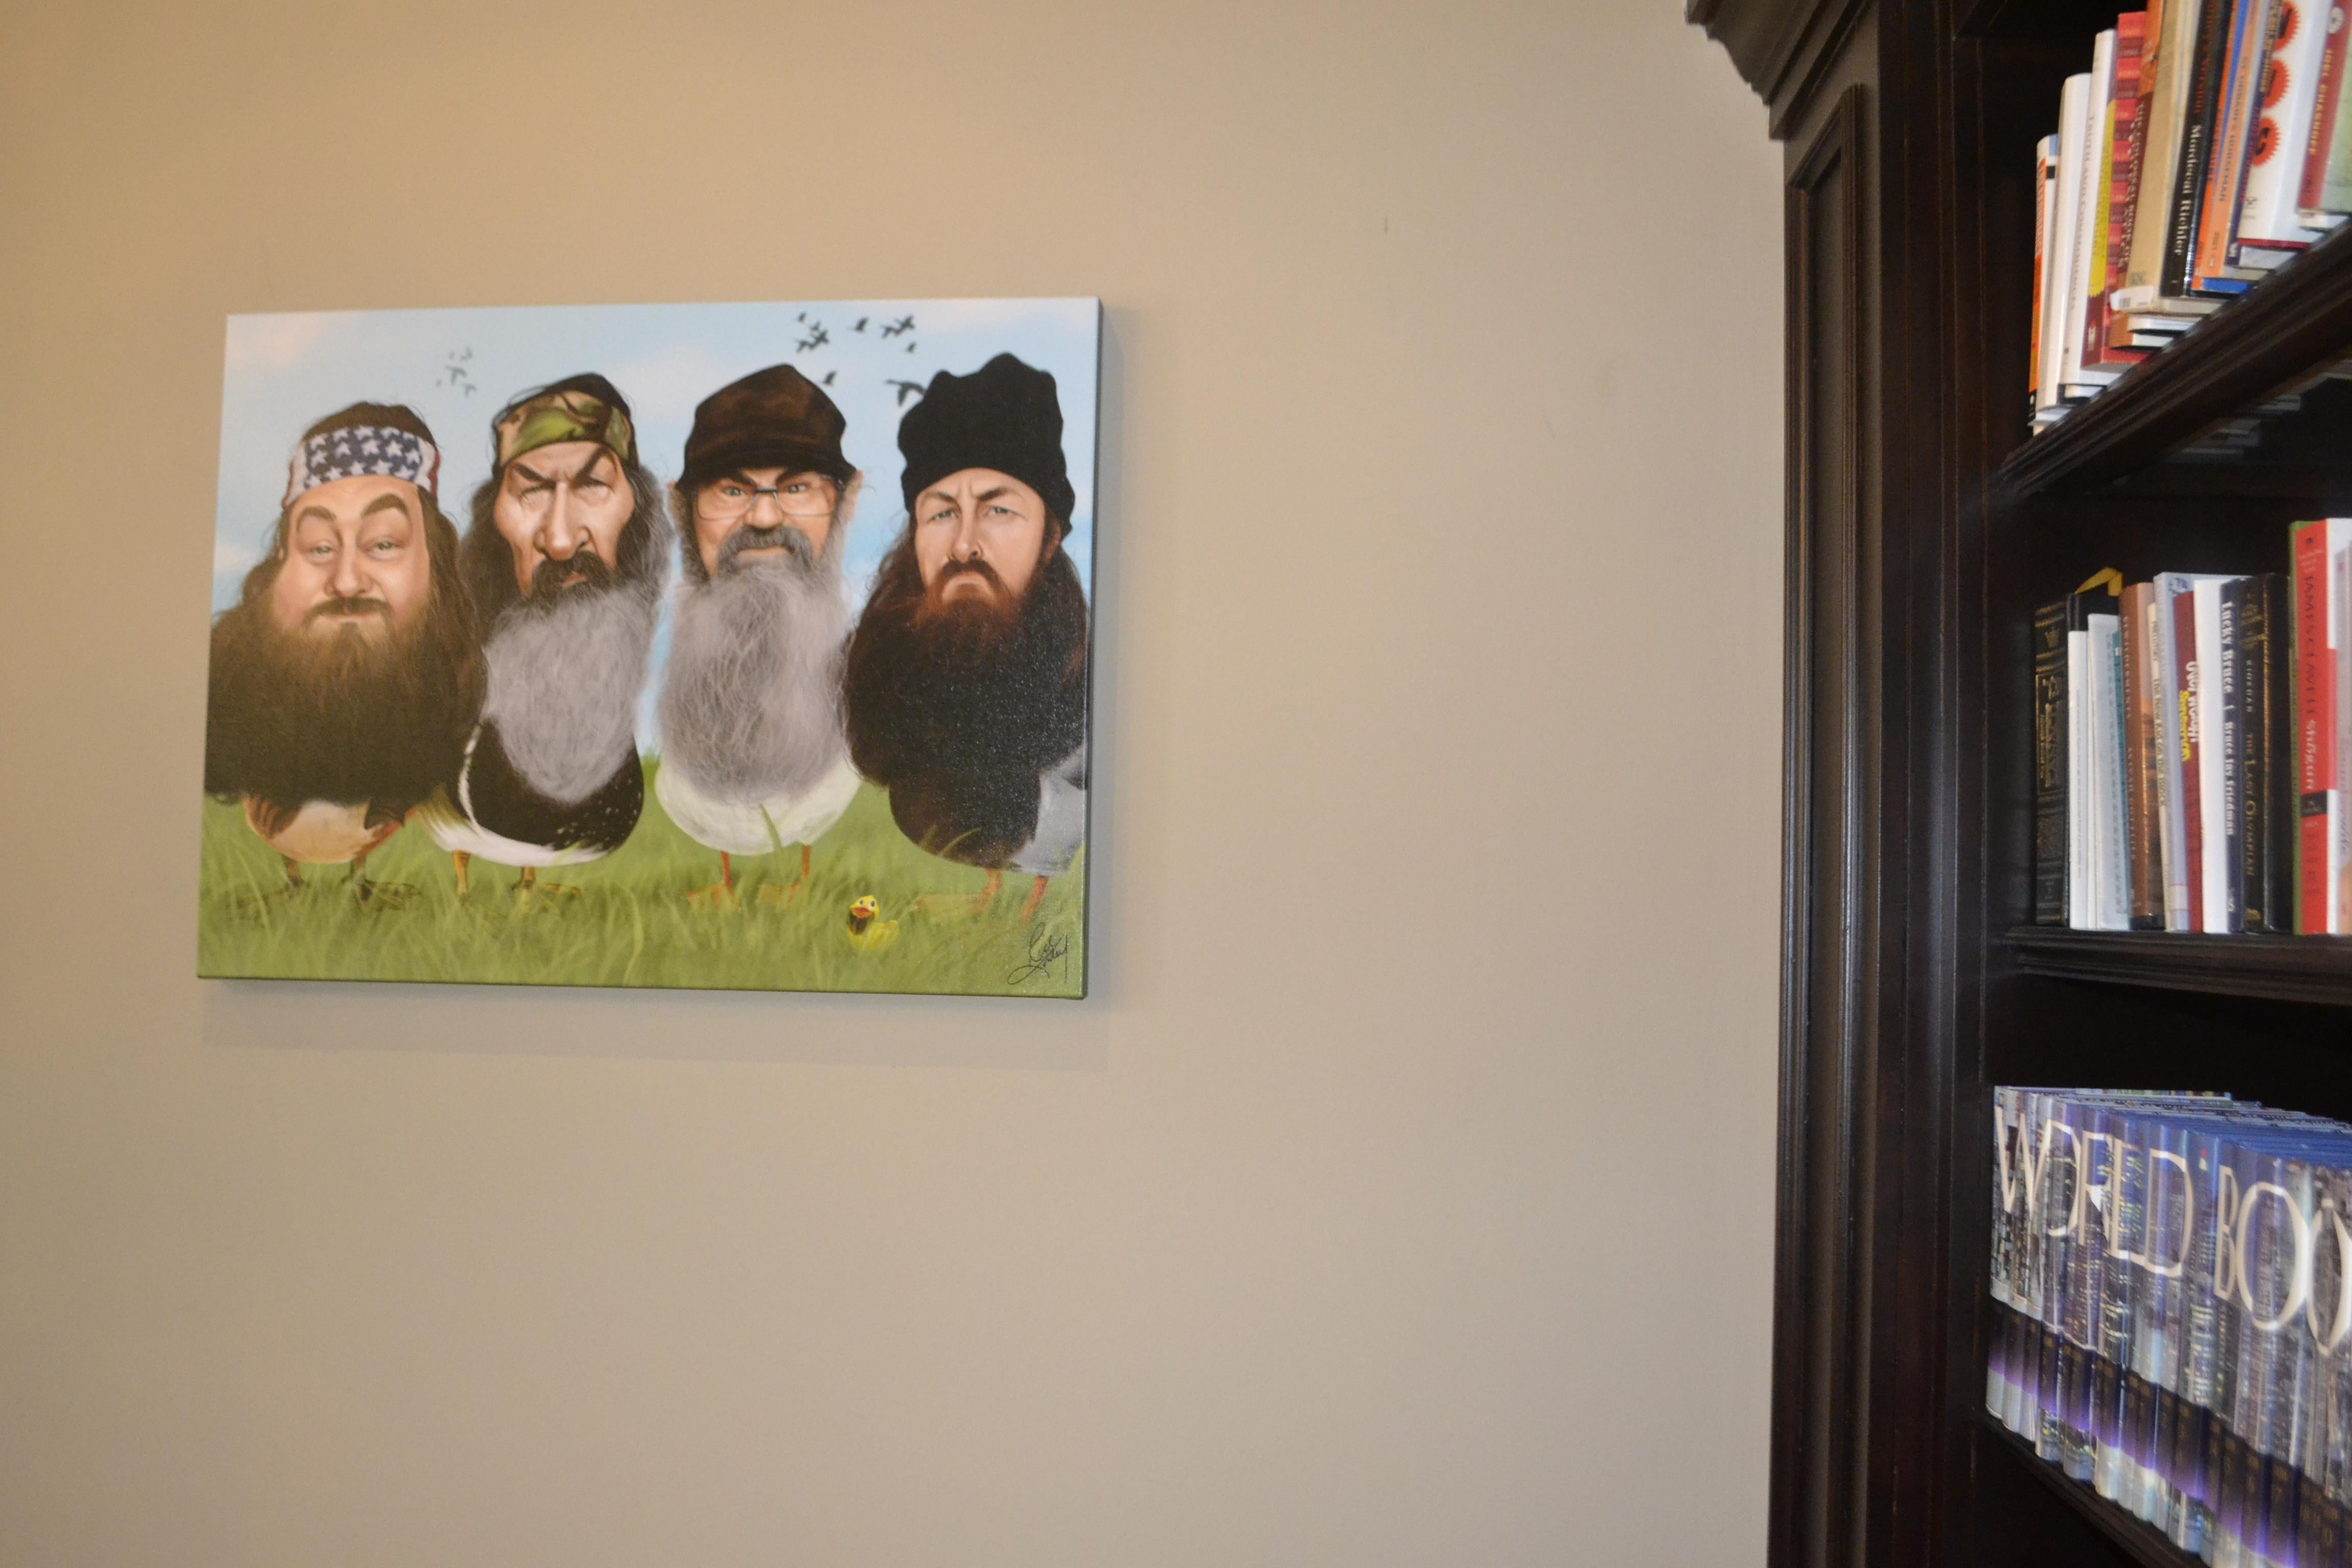 Duck Dynasty #8/20 - Contemporary Print by Rich Conley